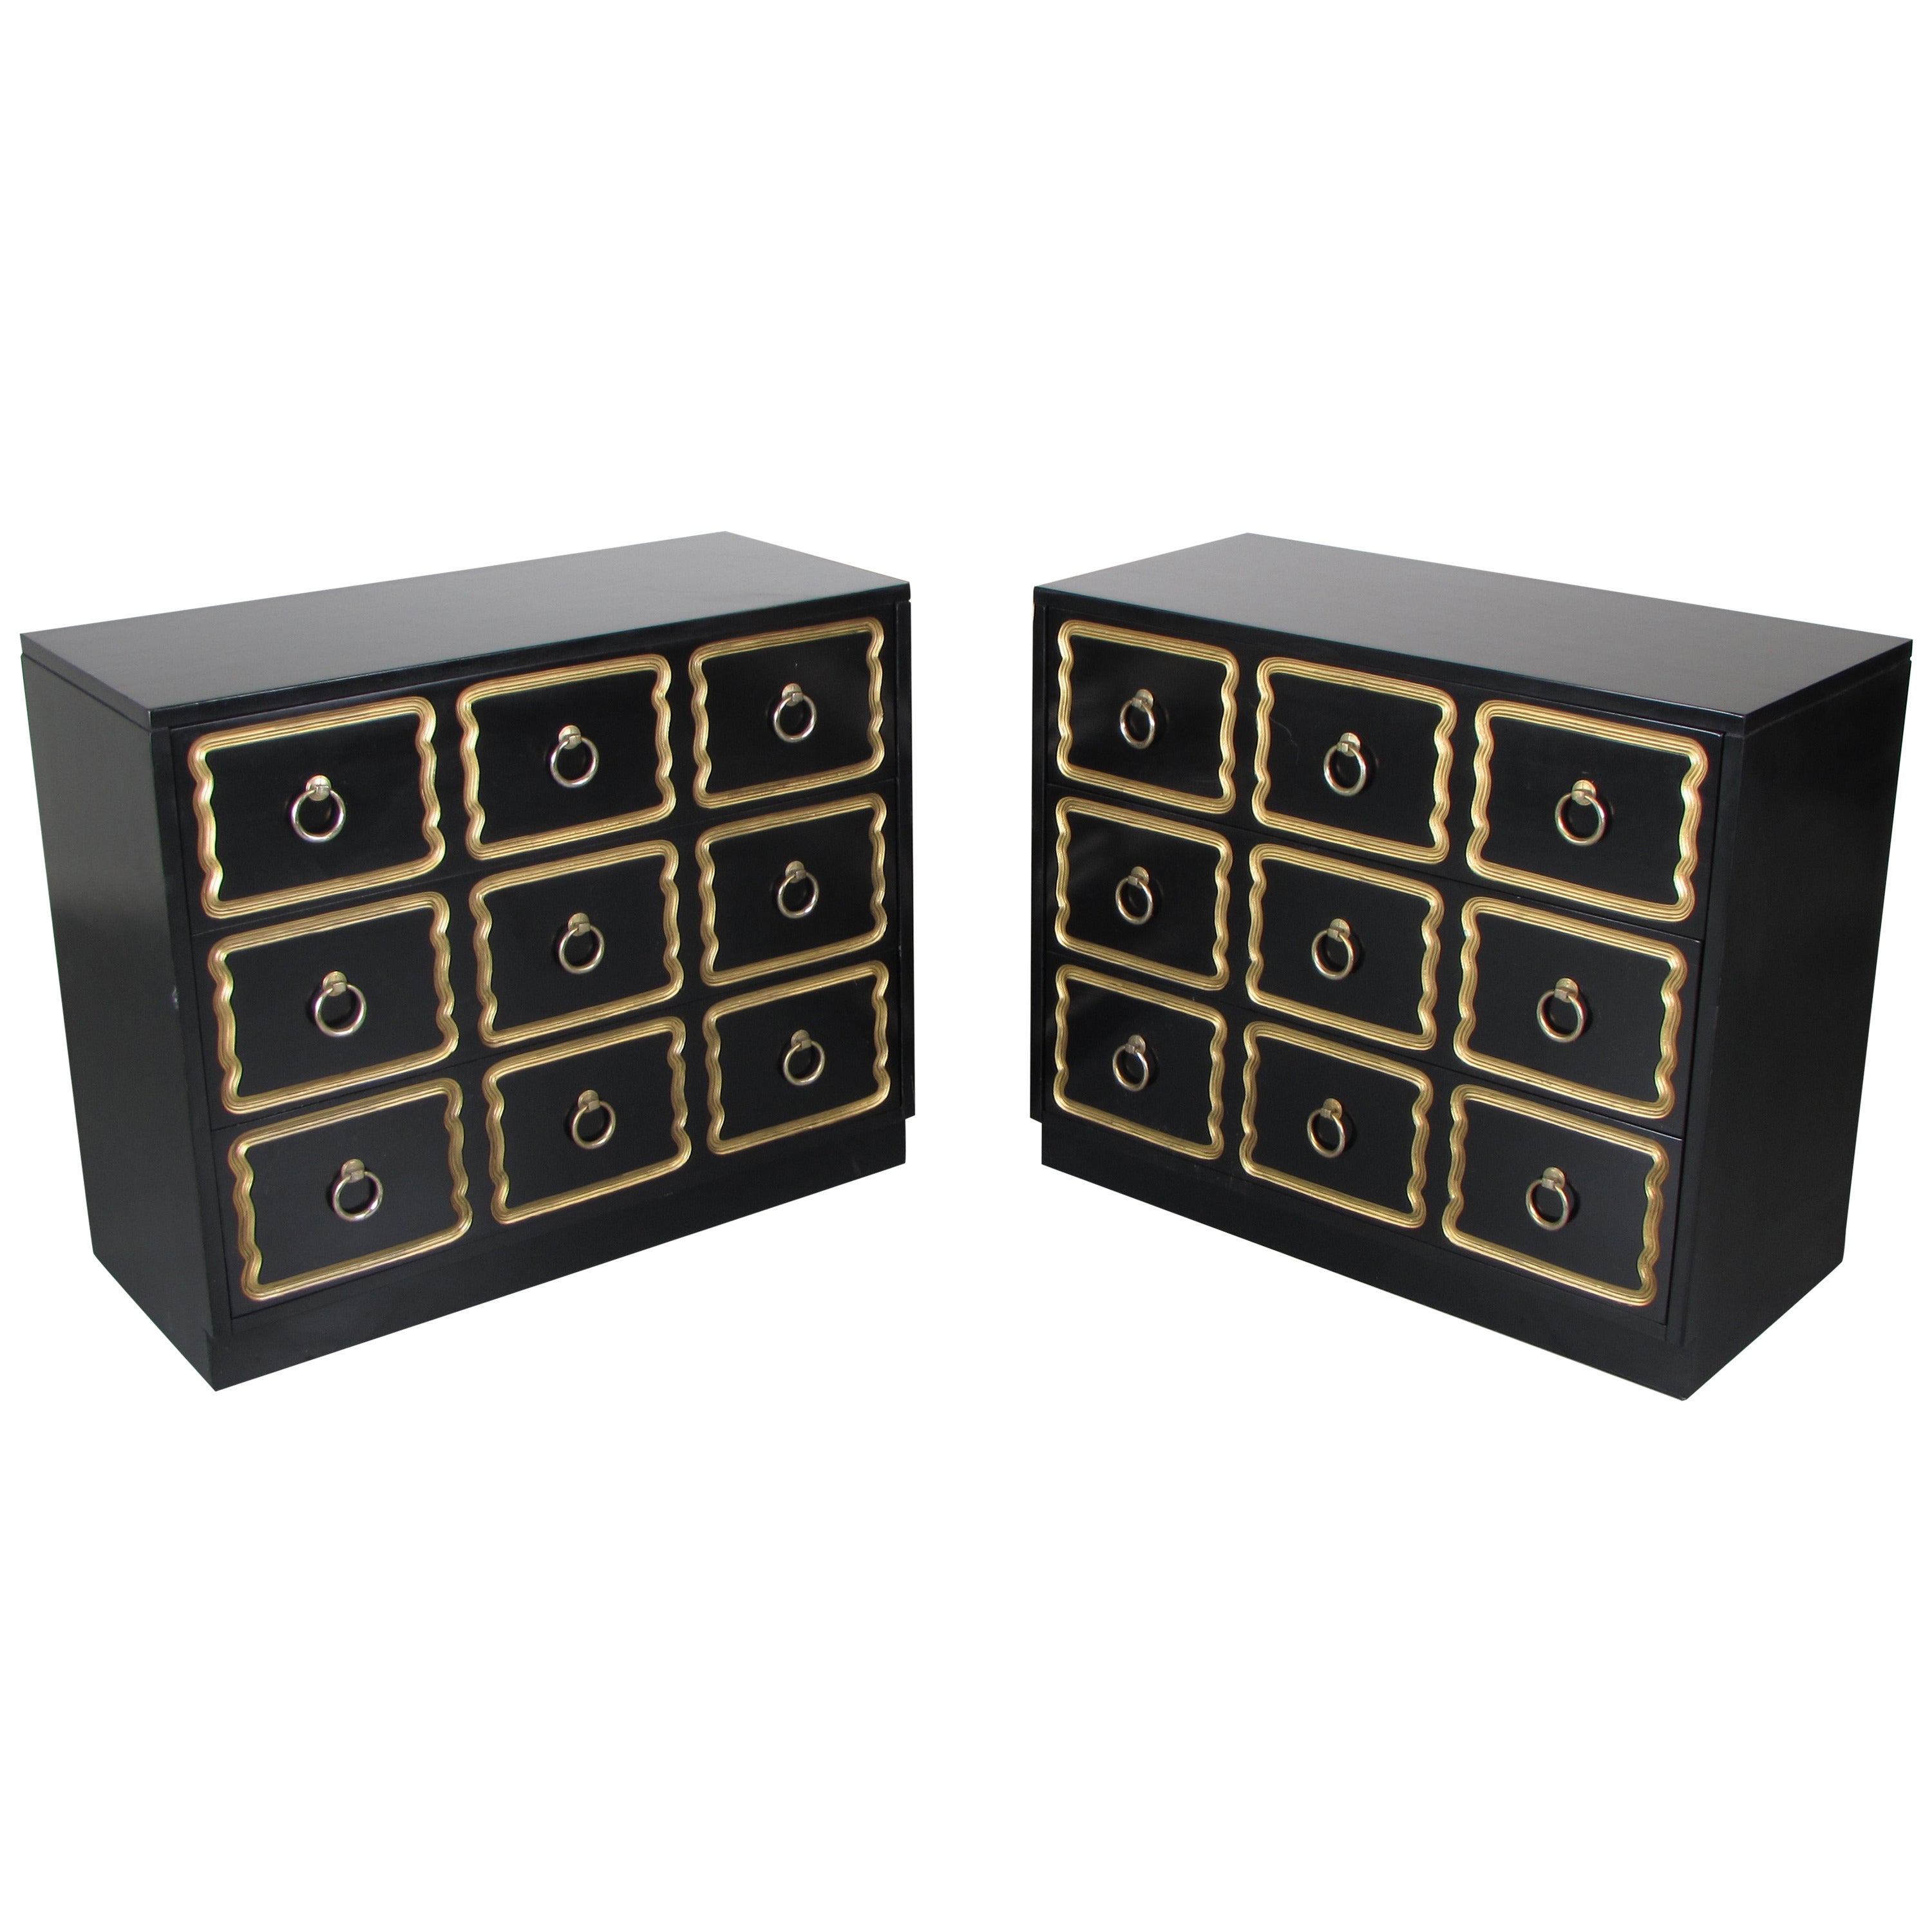 Pair of Glamorous Espana Chests in Black Lacquer by Dorothy Draper, 1950s